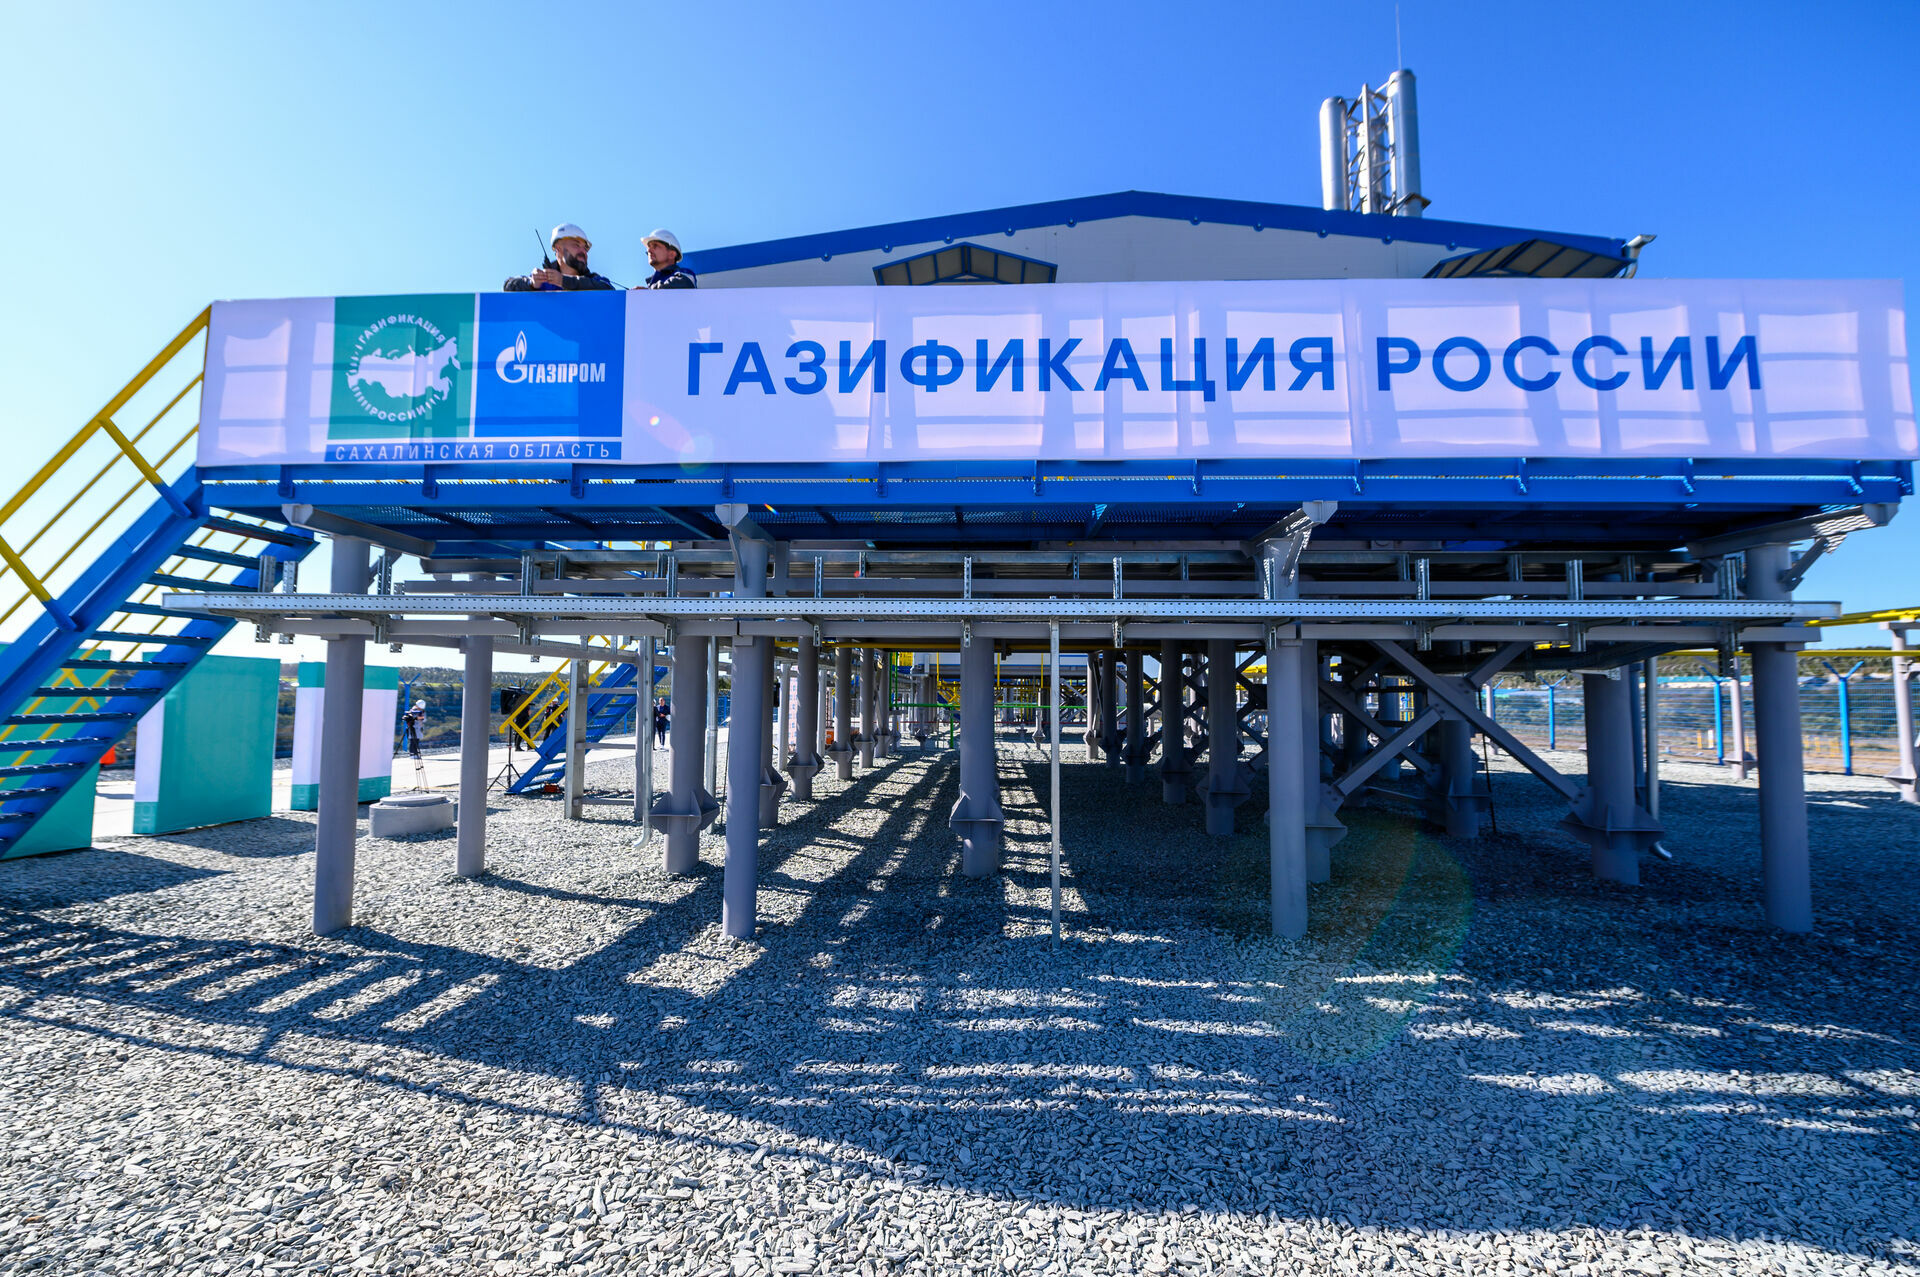 Gazprom gives up the position of a super-rich corporation